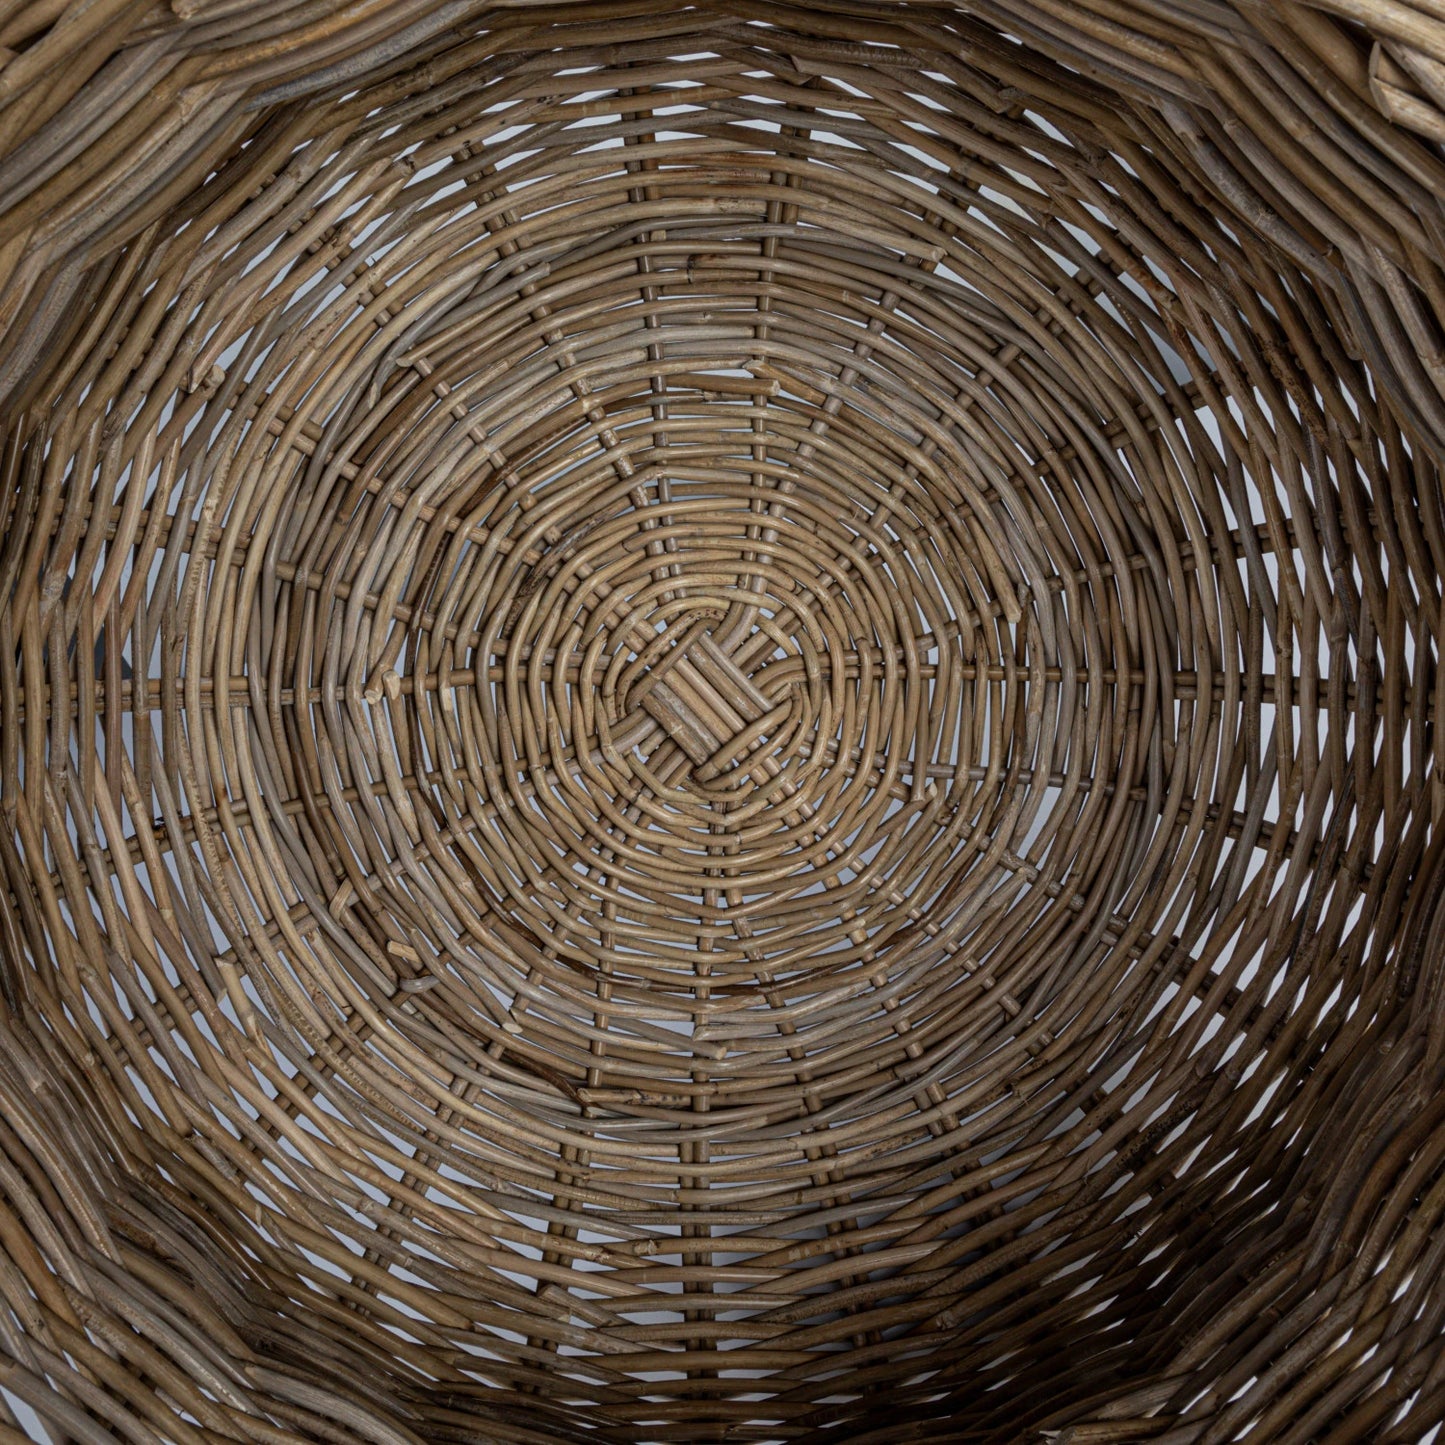 Hand-Woven Rattan Planters, 2 sizes (Holds 18" & 16" Pots)